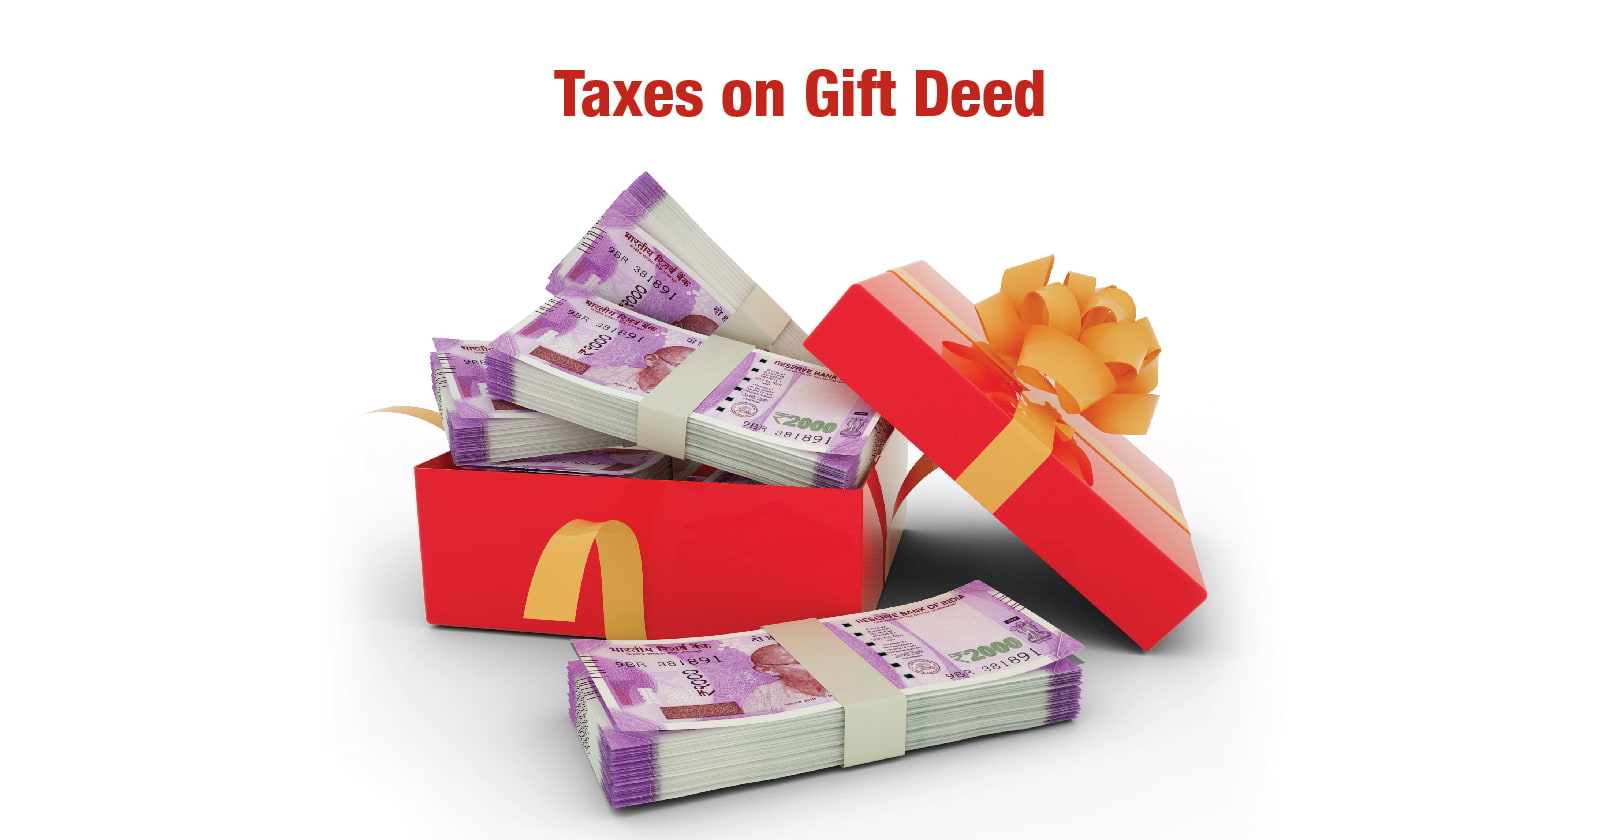 Gift Tax Explained - Do You Pay Taxes On Gifted Money? - YouTube